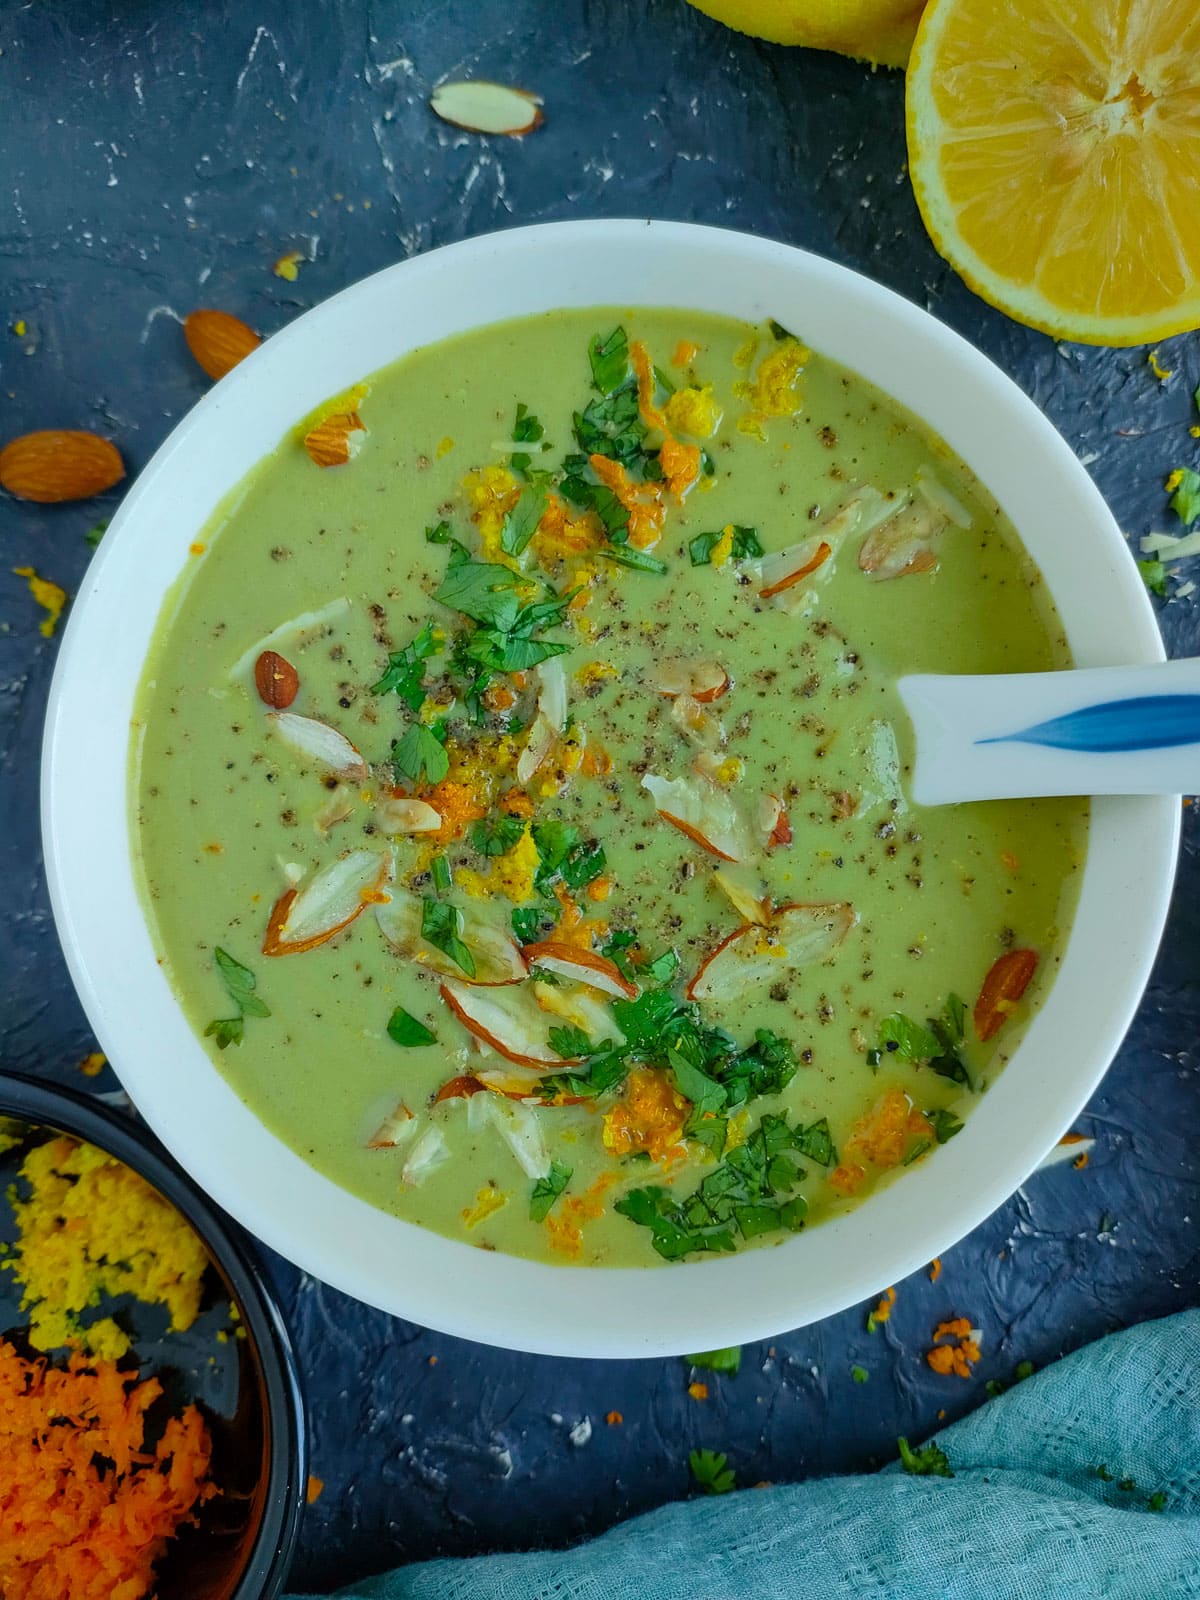 Creamy broccoli almond soup garnished with toasted almonds, parsley and lemon and orange zest in a white bowl.